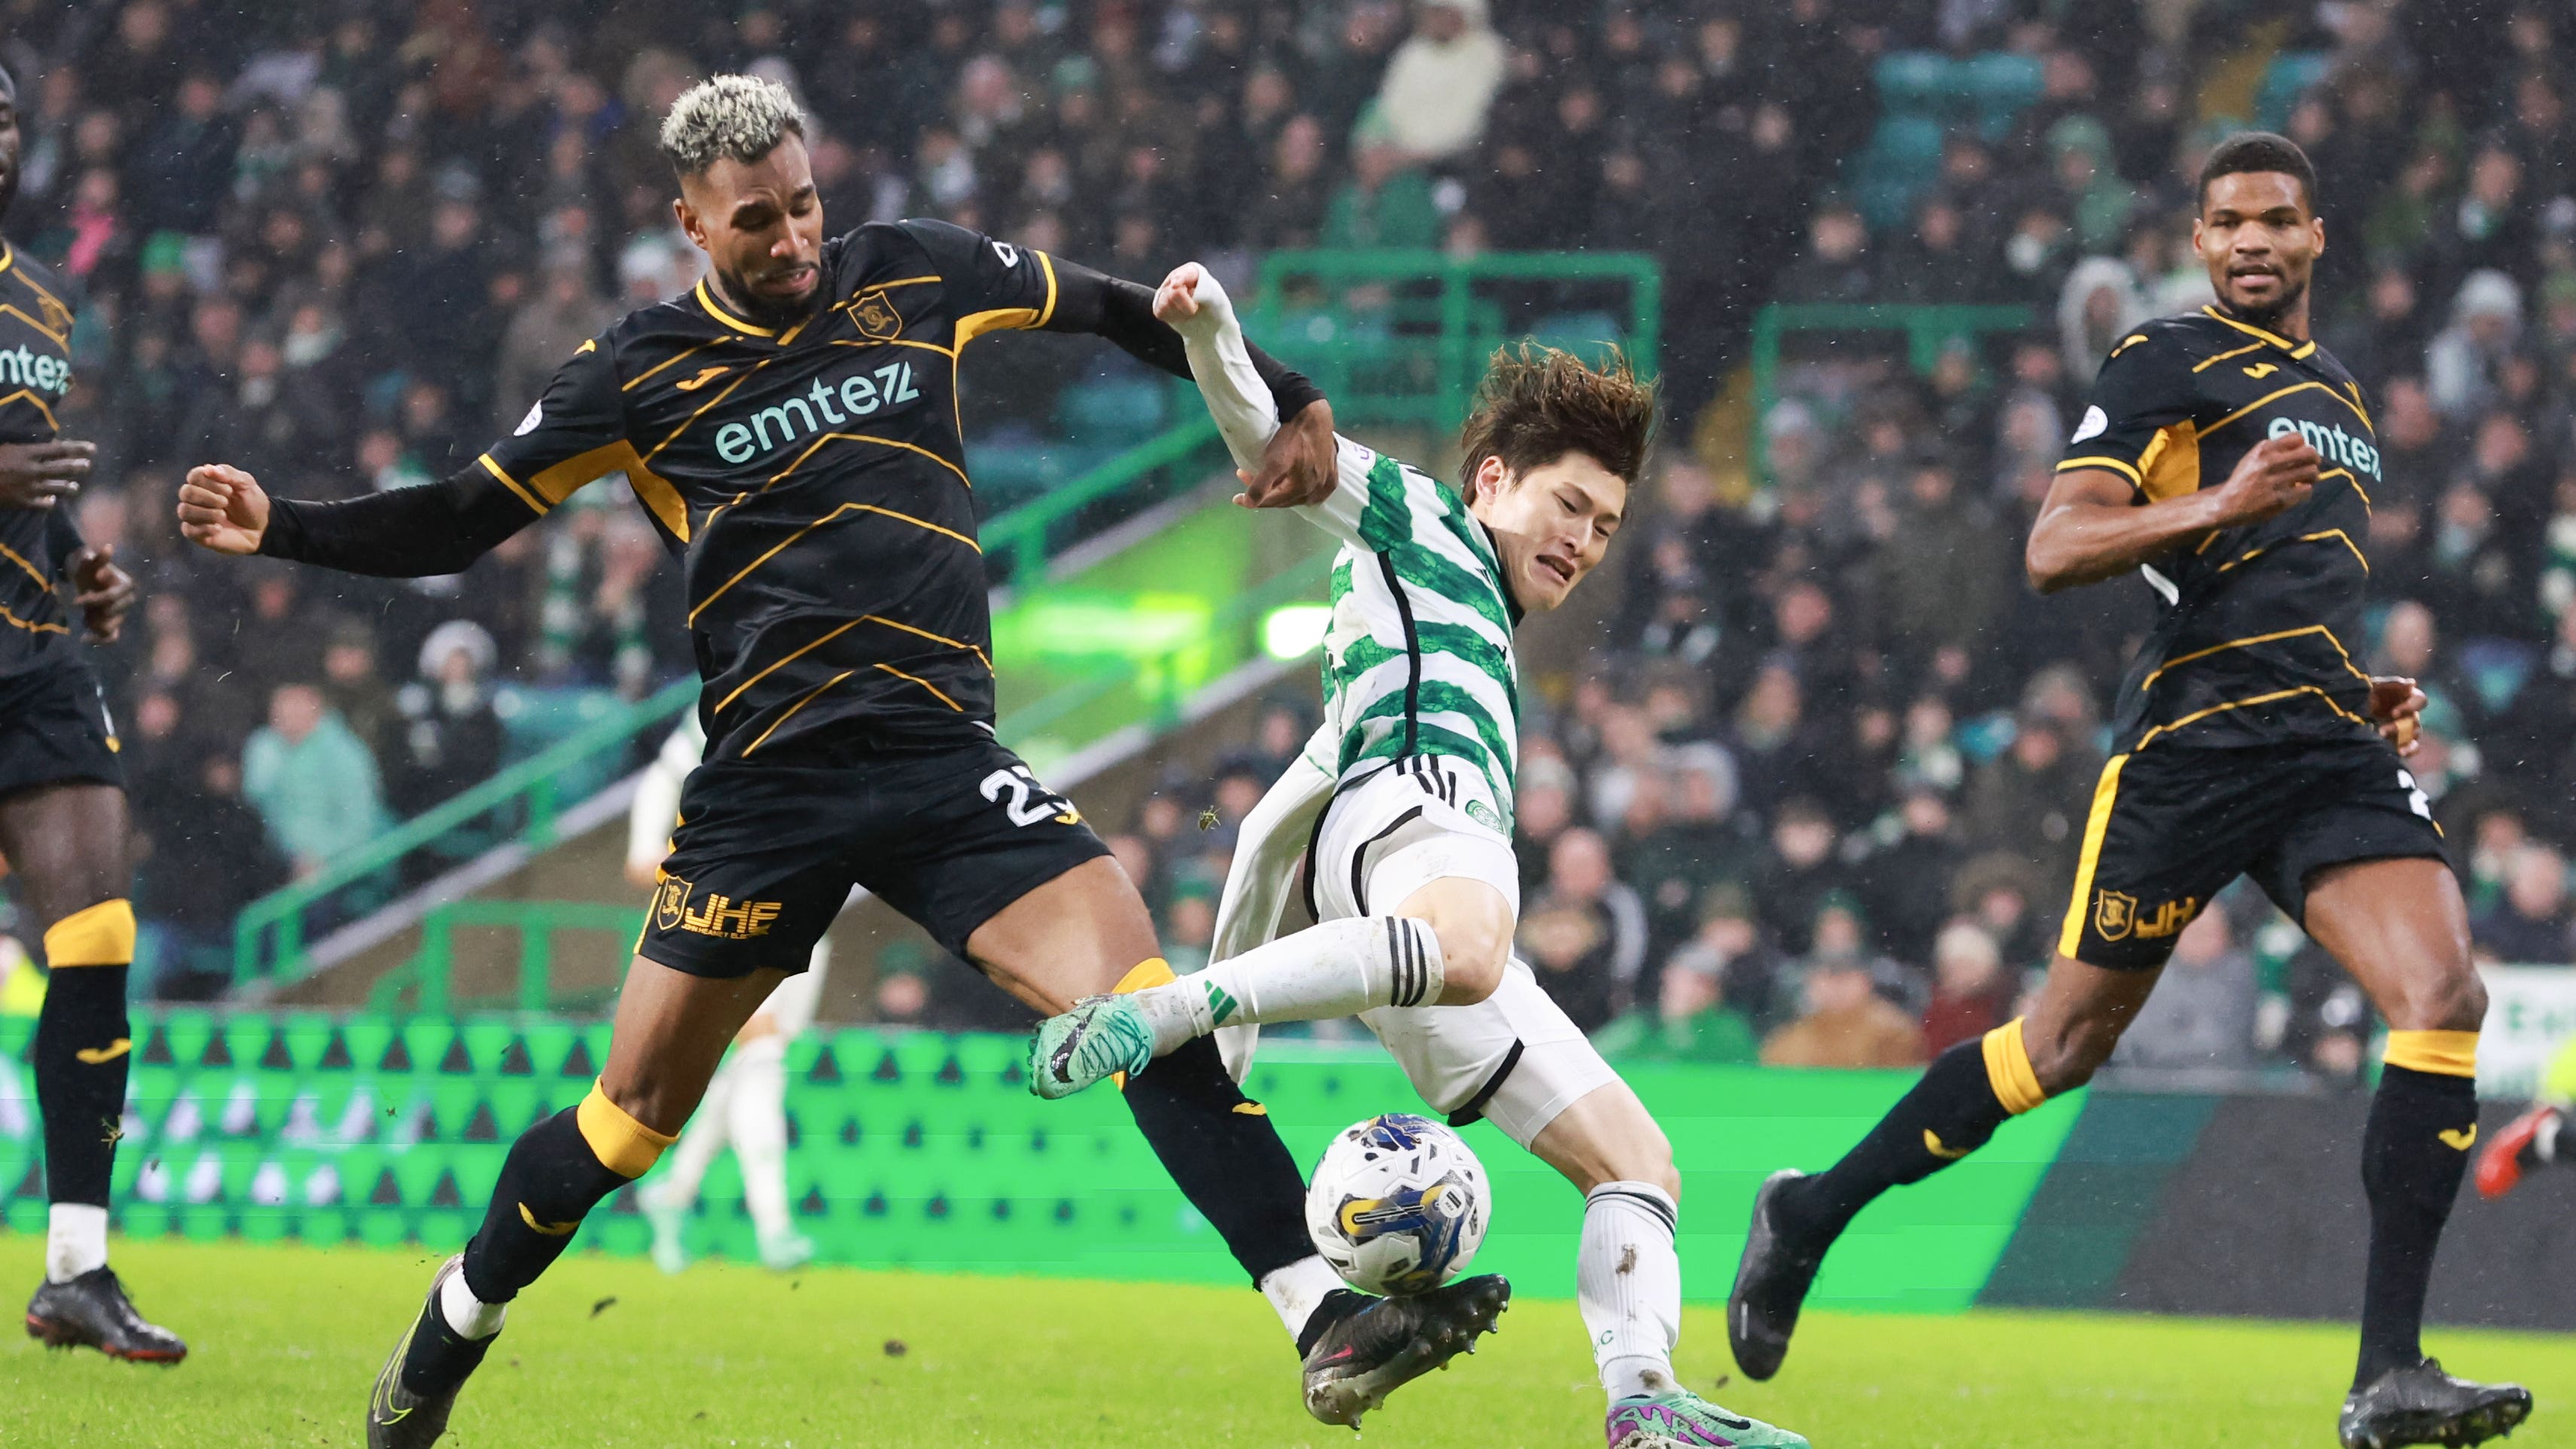 Celtic get back on the winning trail and see off Livingston